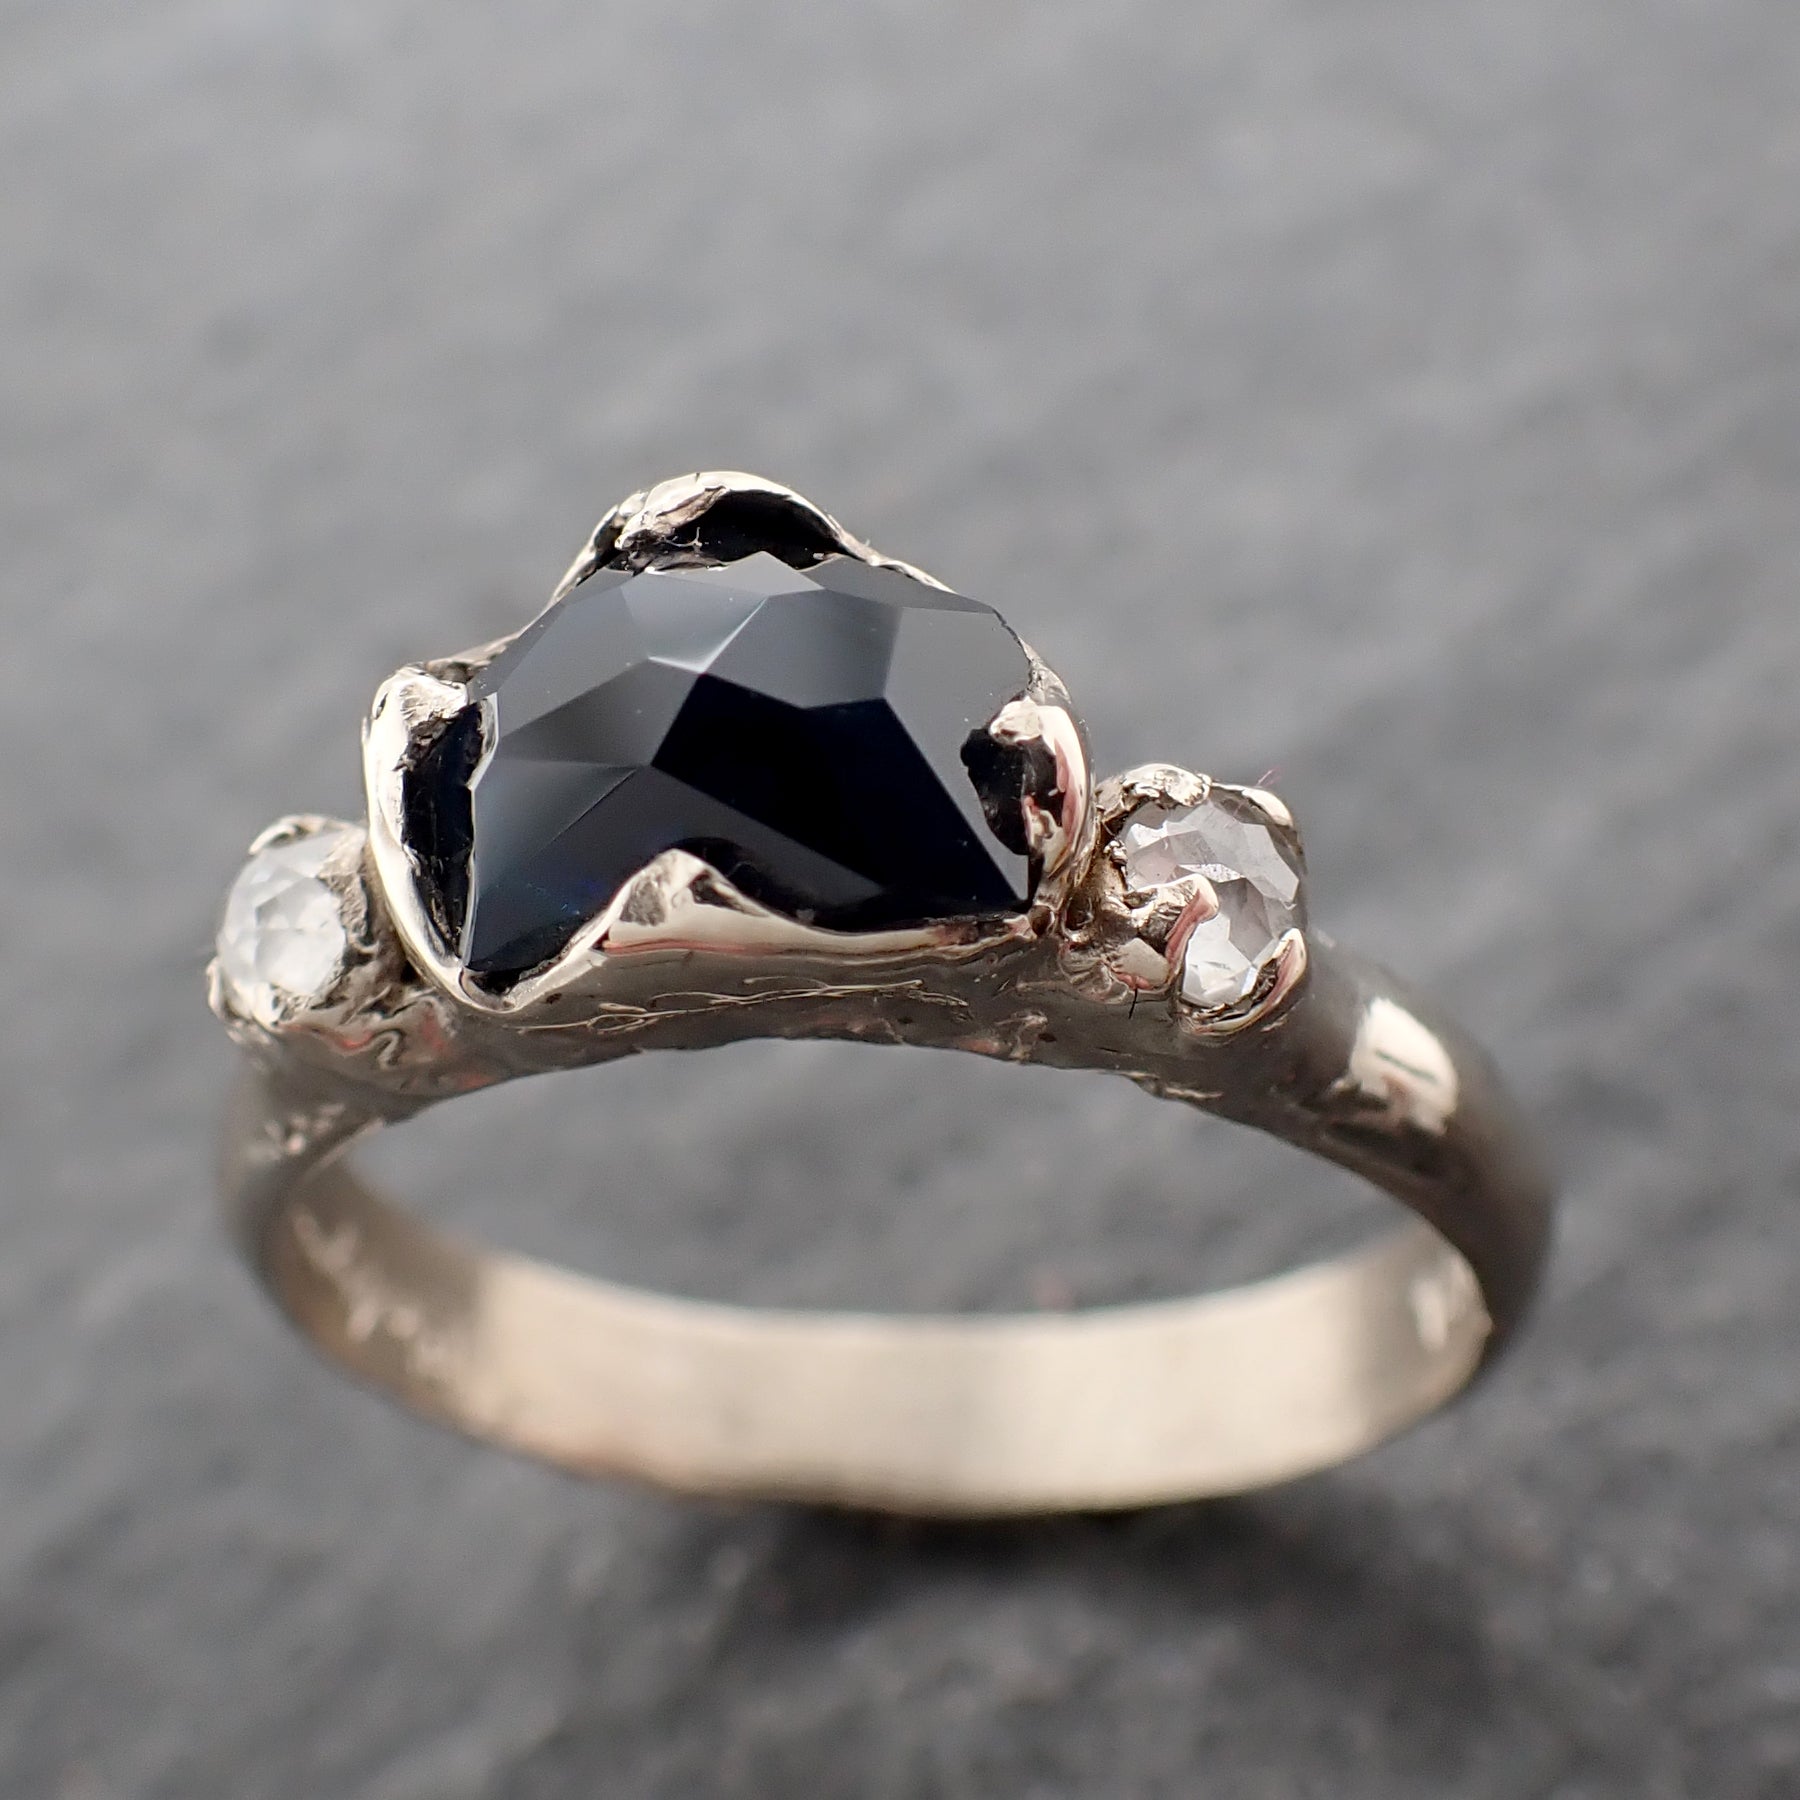 Partially faceted Sapphire and fancy cut Diamond 14k White Gold Engagement Ring Wedding Ring Custom Multi stone Gemstone Ring 2483